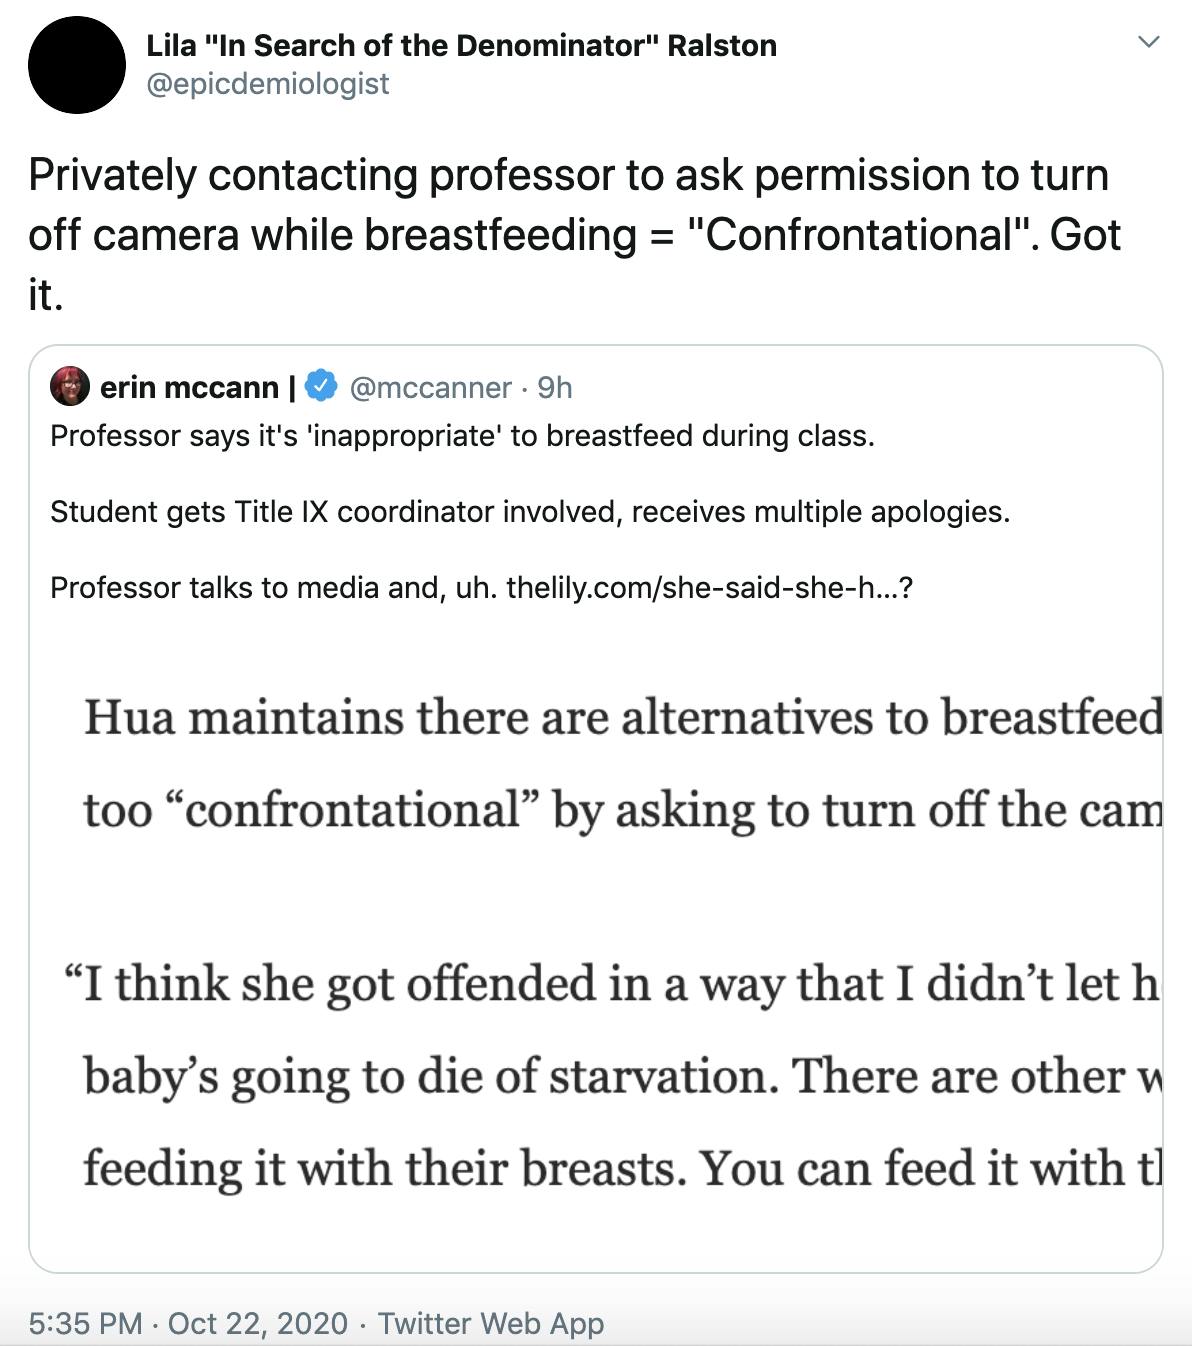 Privately contacting professor to ask permission to turn off camera while breastfeeding = 'Confrontational'. Got it.